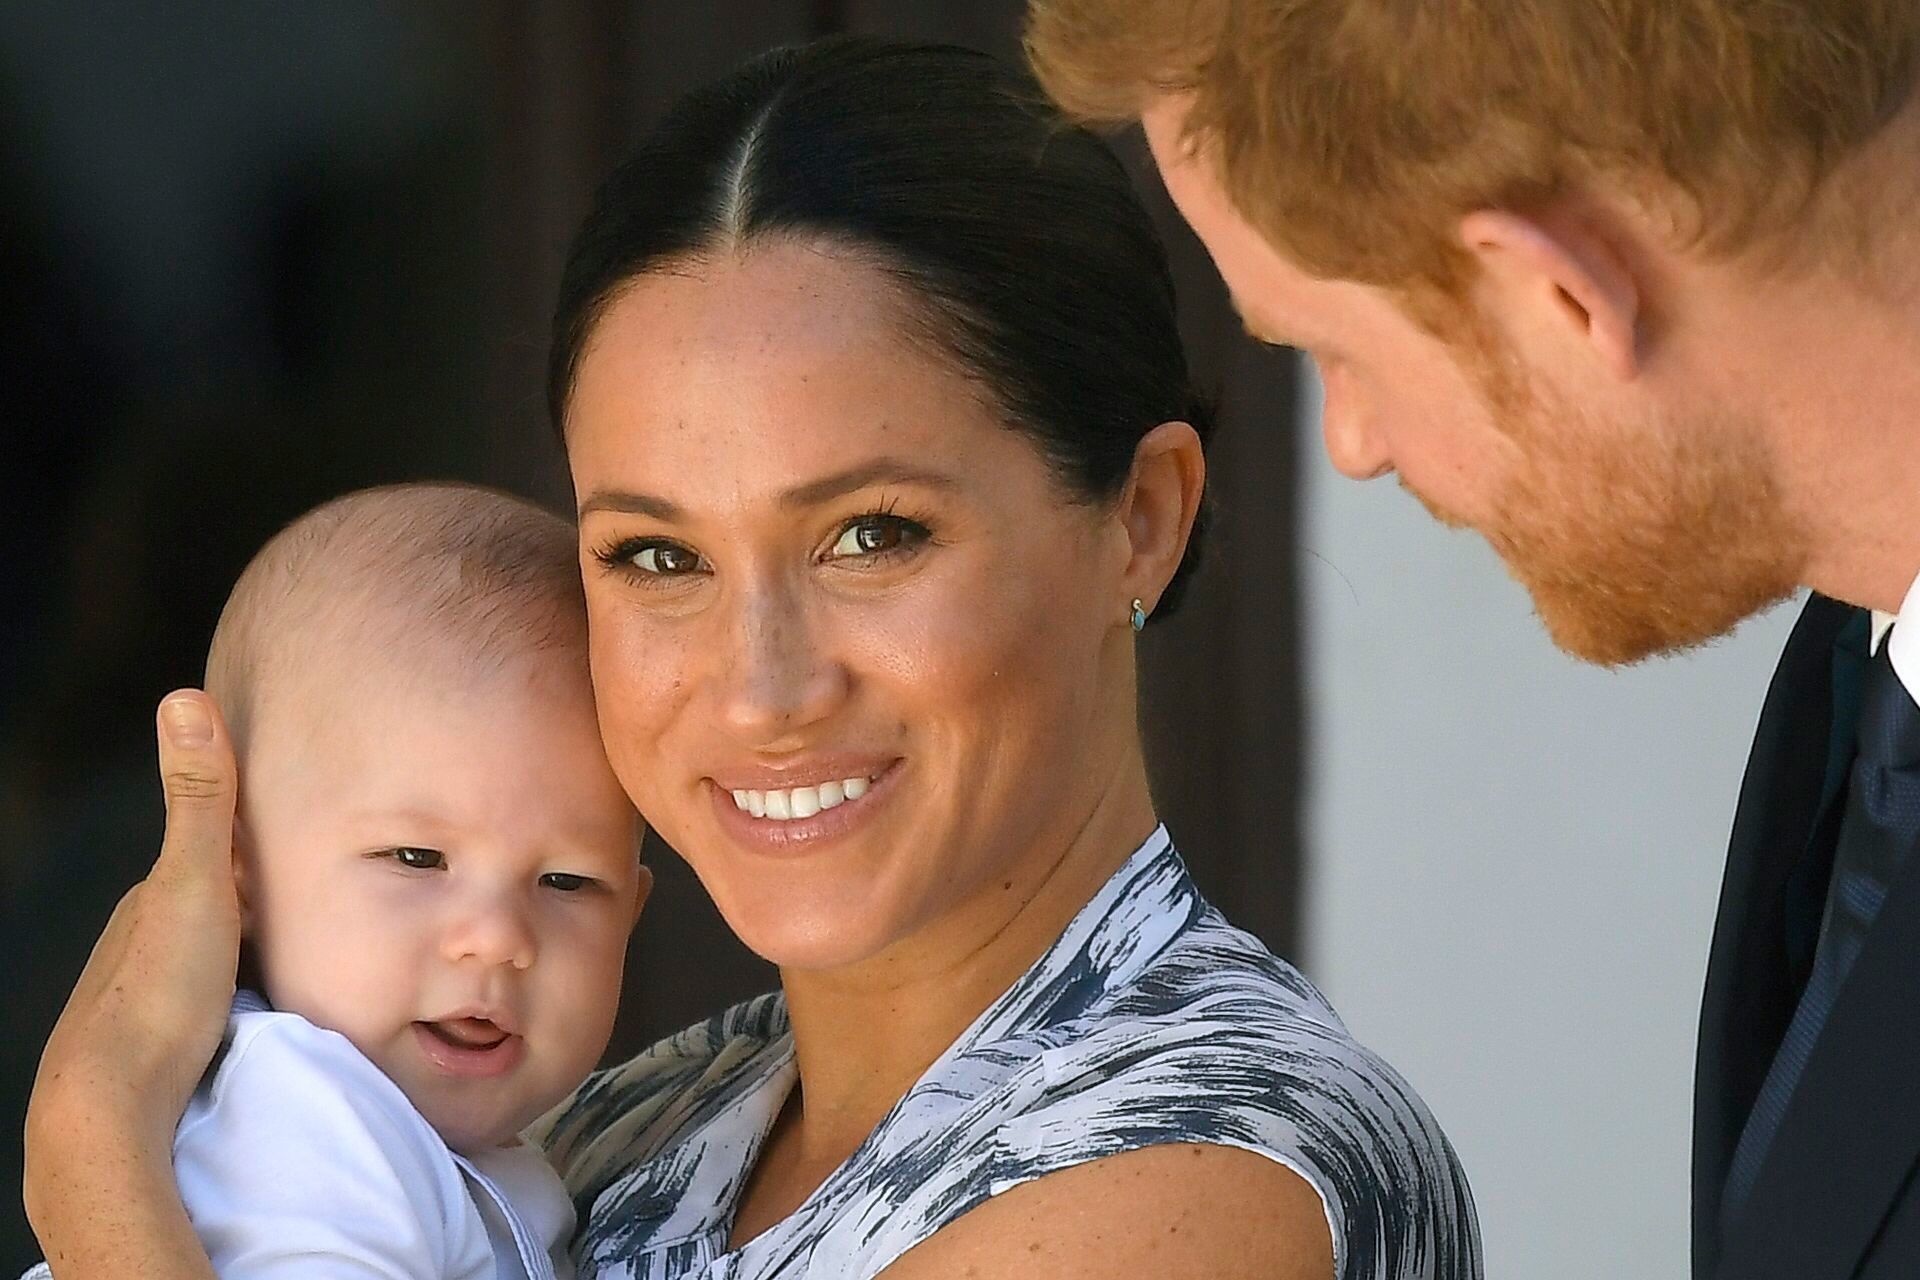 Prince Harry and Meghan Duchess of Sussex, holding their son Archie Harrison Mountbatten-Windsor